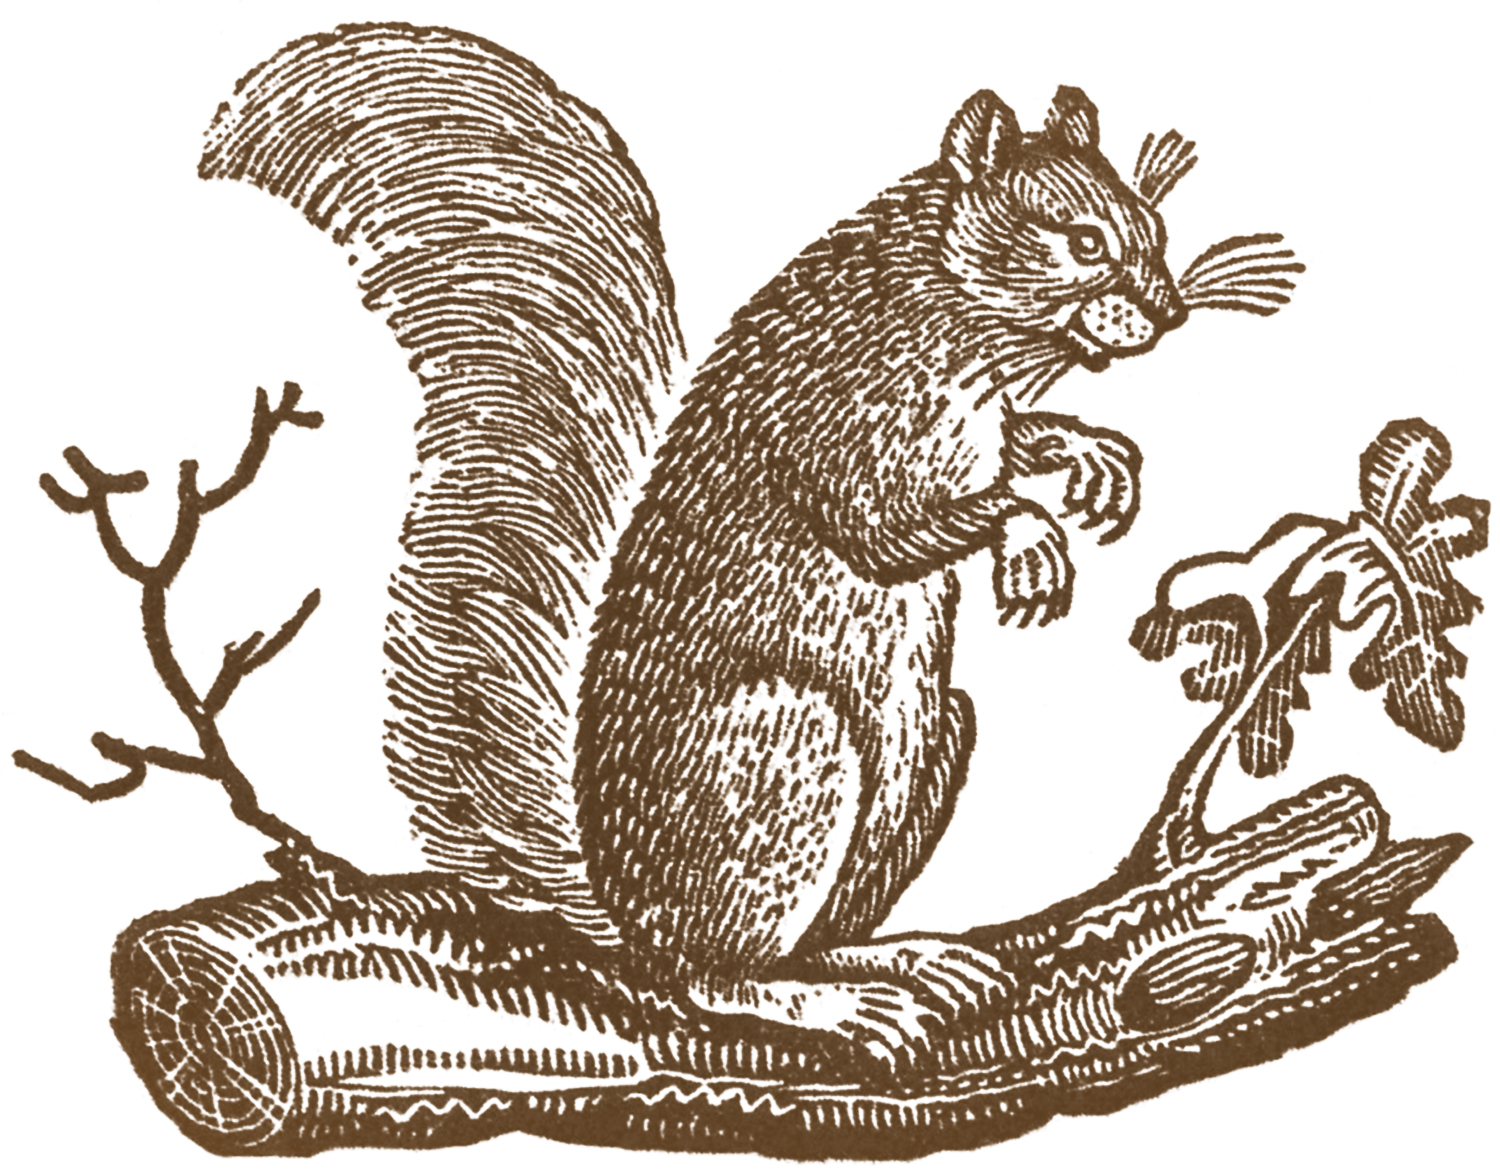 I love you free. Clipart squirrel couple